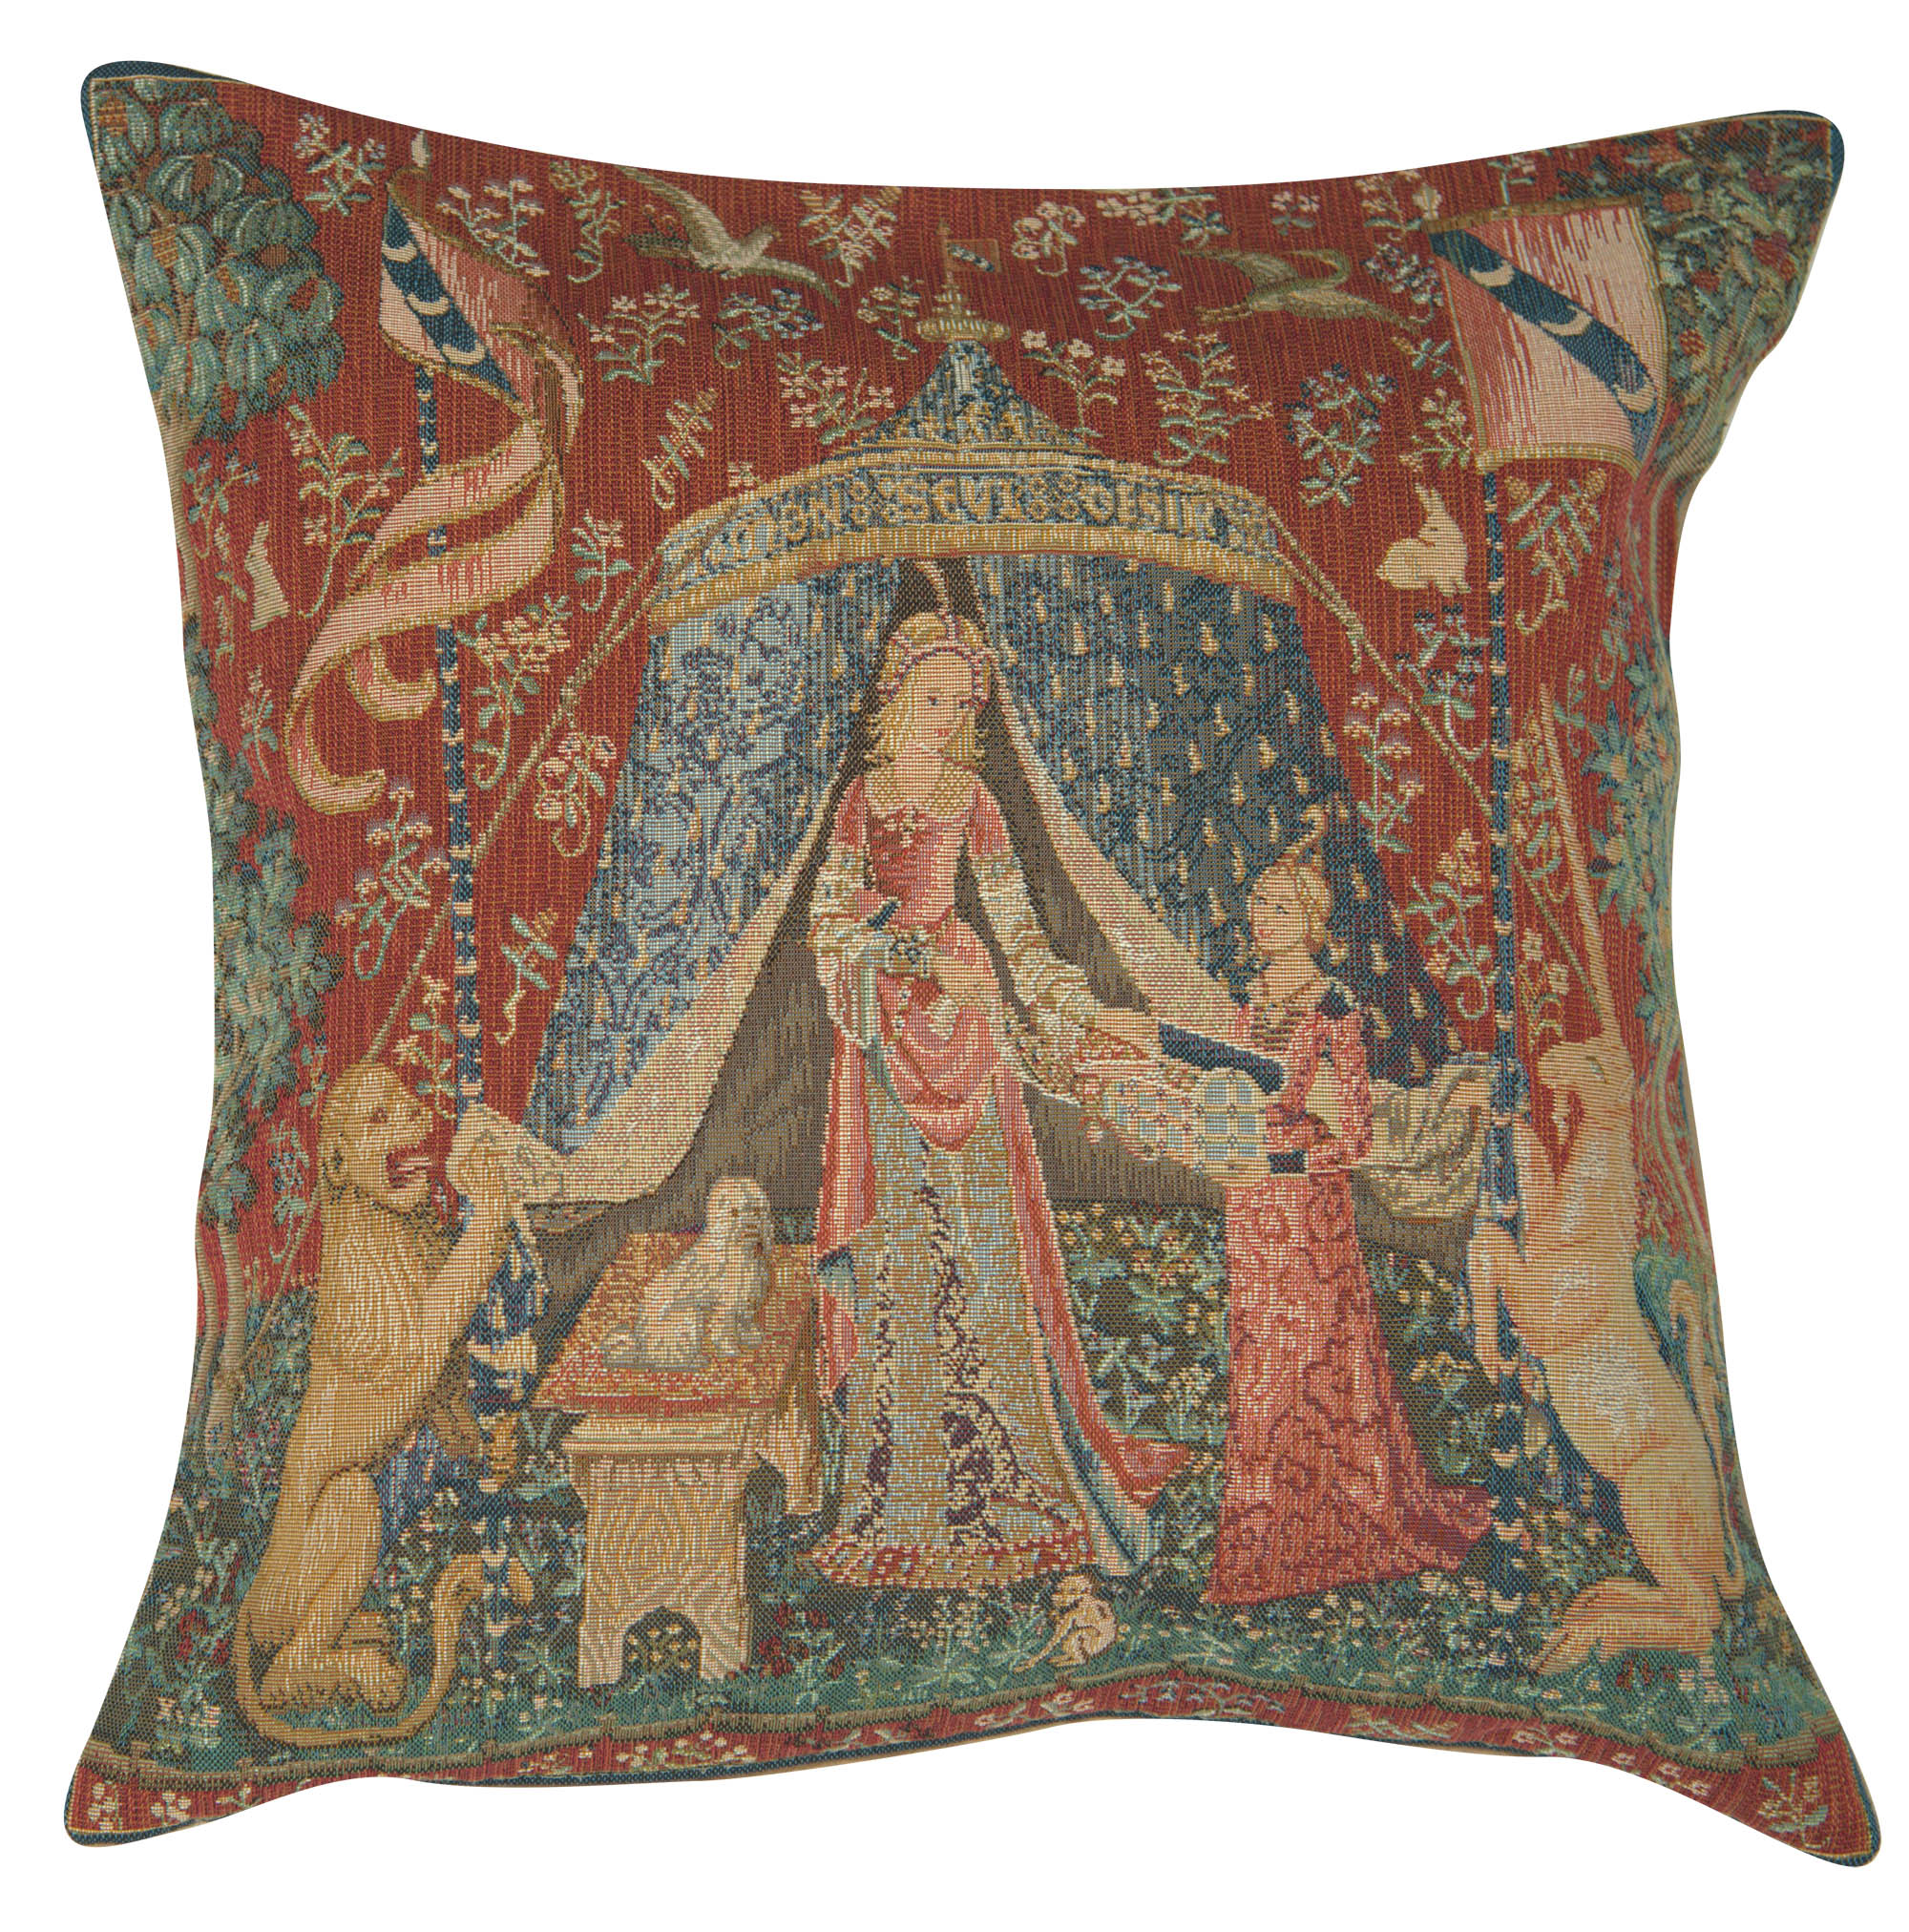 A Mon Seul Desir French Tapestry Cushion Covers 19x19 inch Couch Pillow Cover